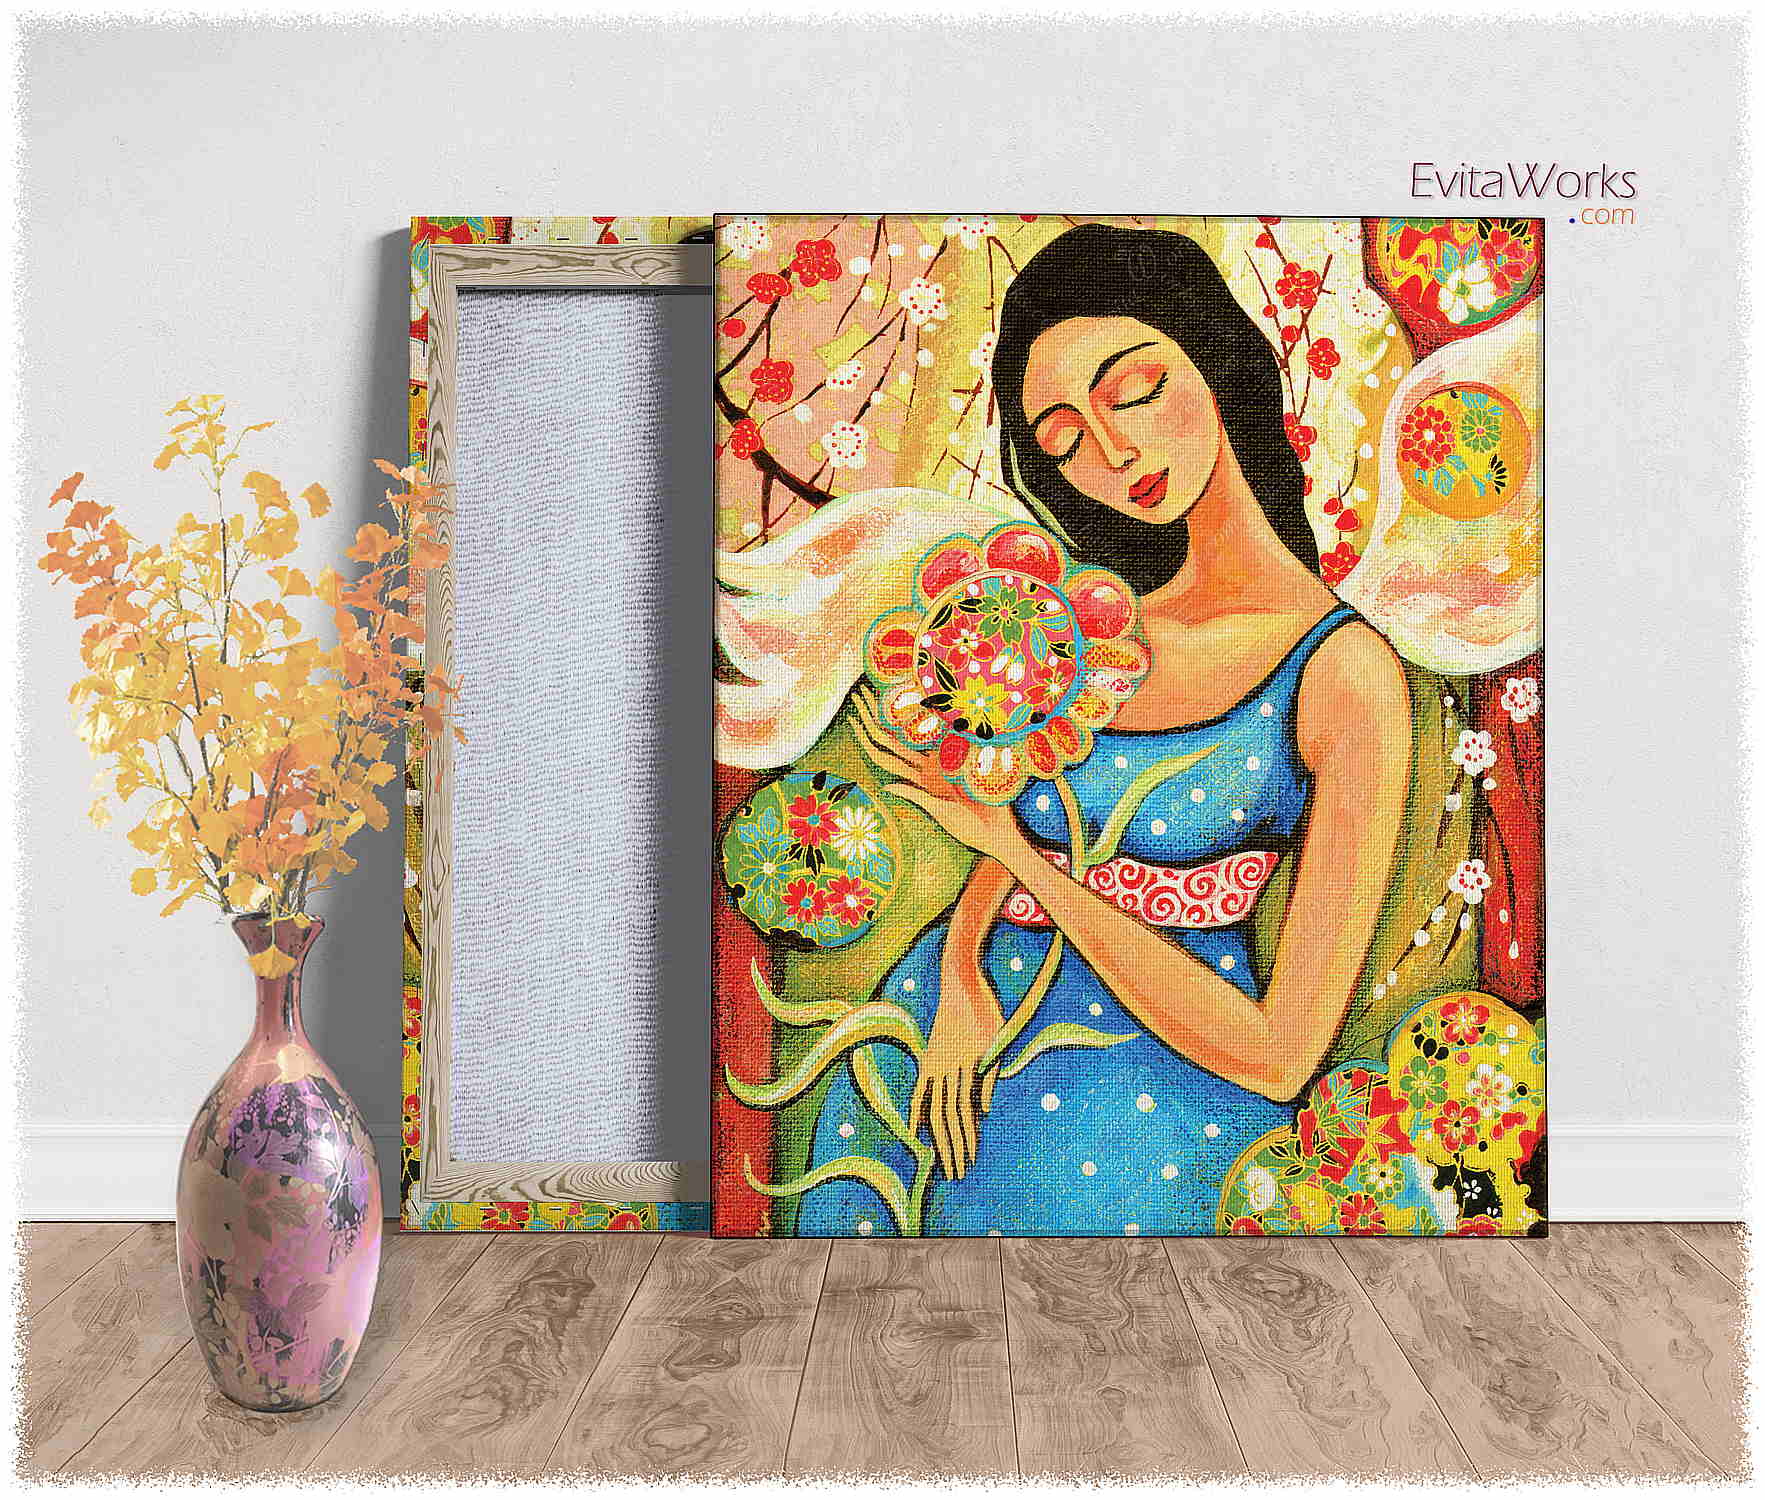 Hit to learn about "Birth Flower, Maternity, Tree of Life" on canvases